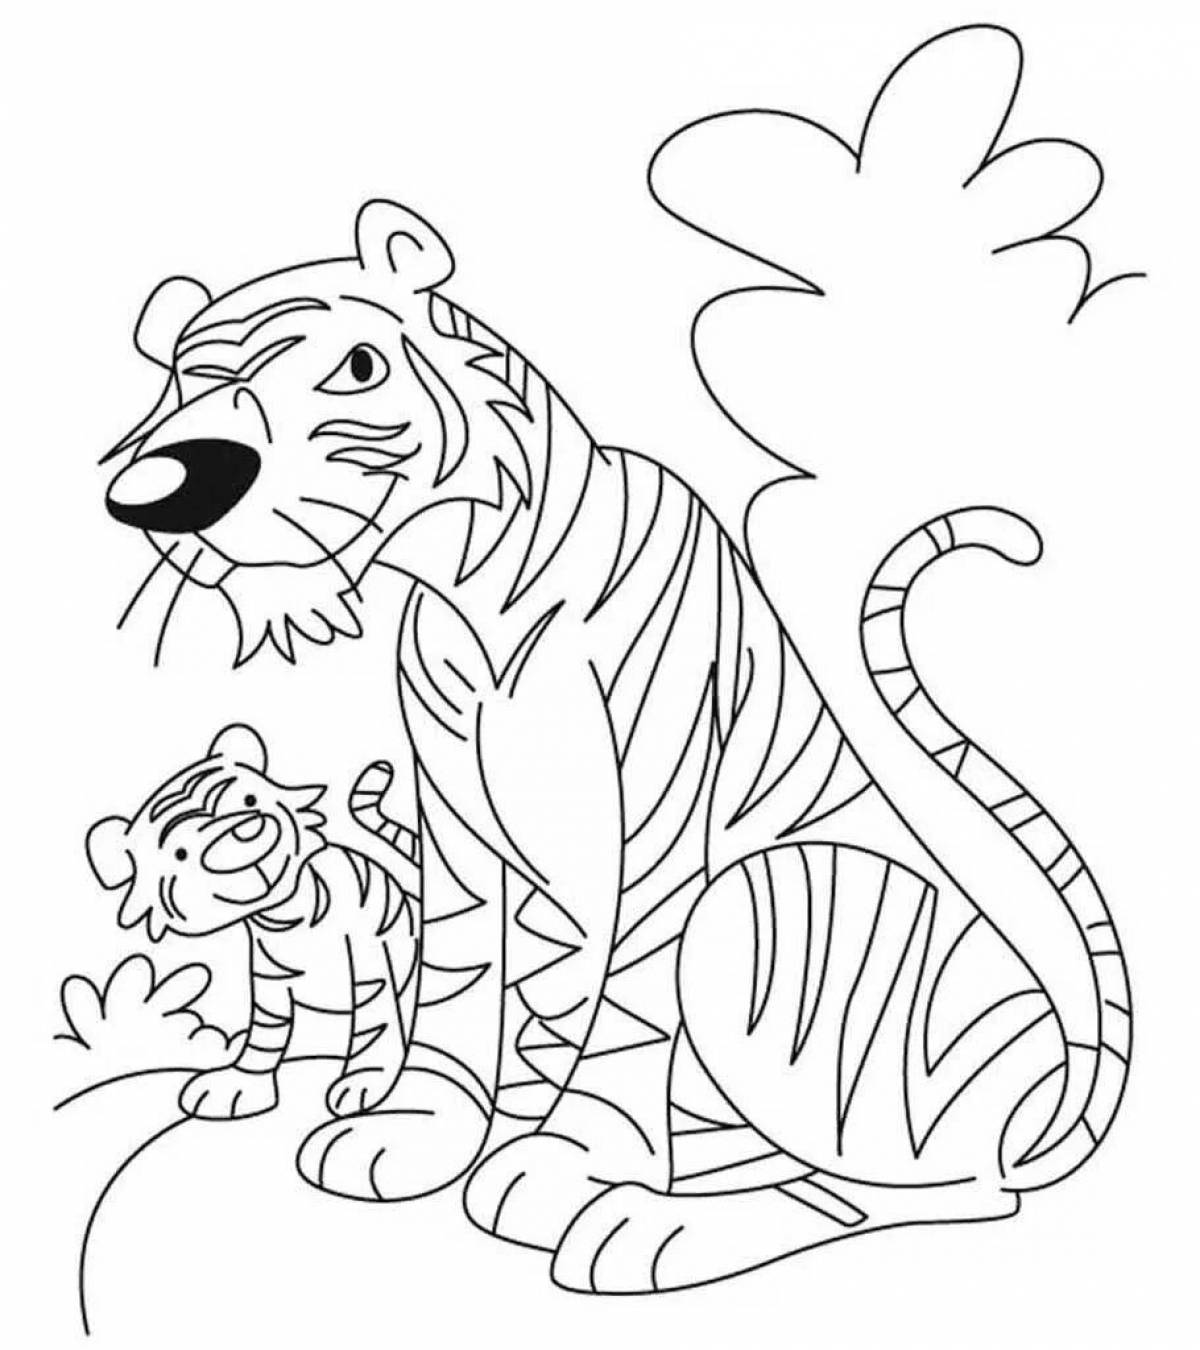 Fancy tigress with cub coloring book